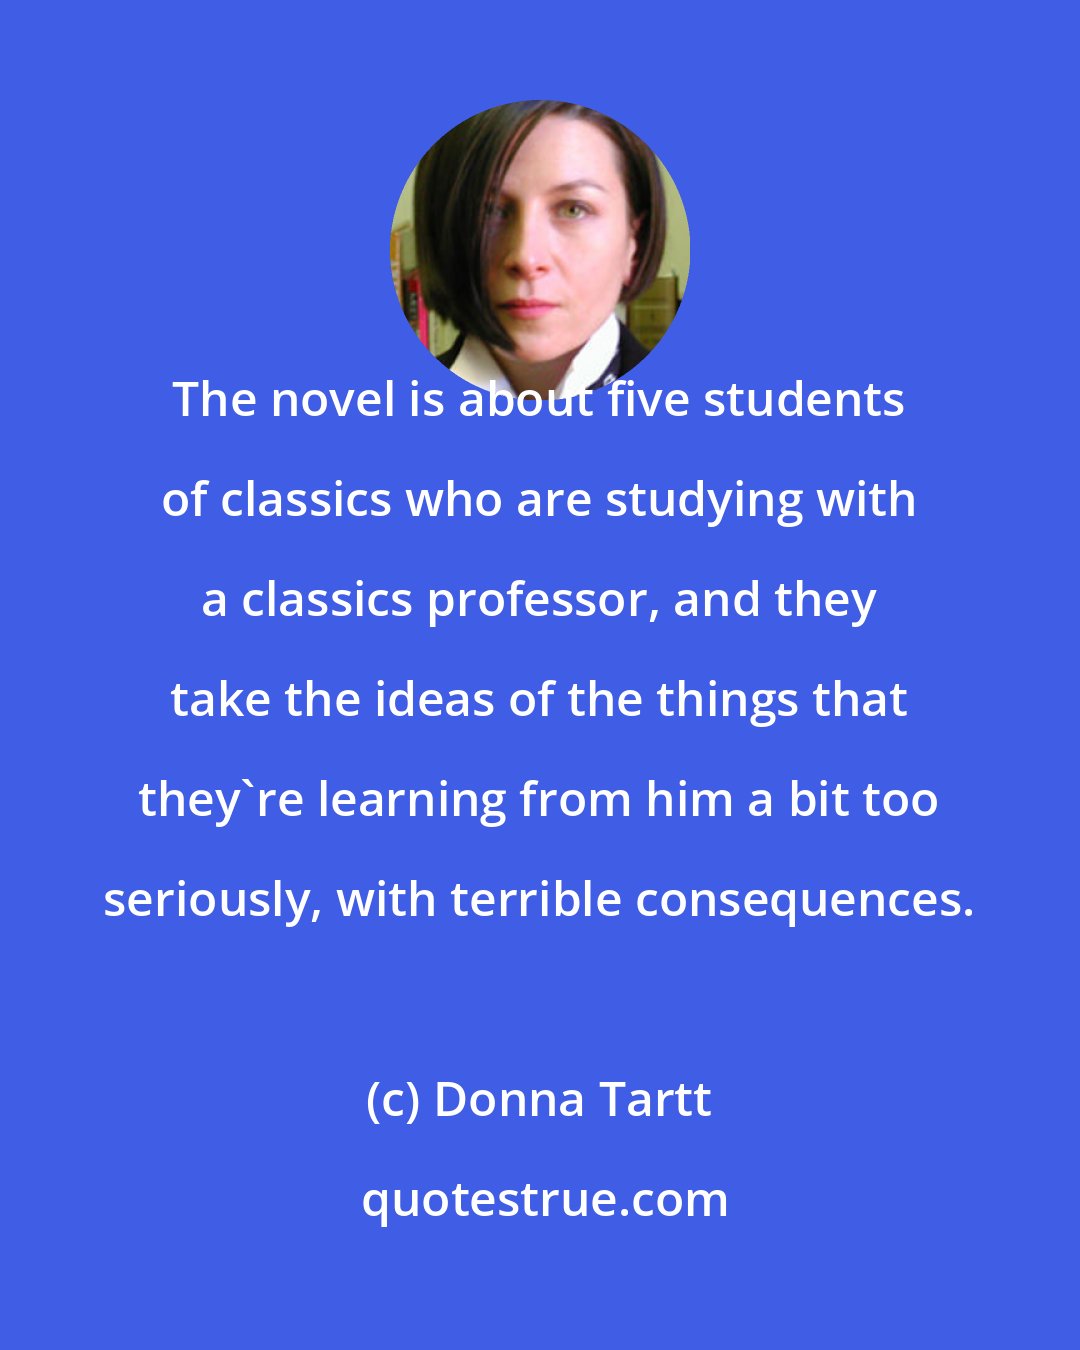 Donna Tartt: The novel is about five students of classics who are studying with a classics professor, and they take the ideas of the things that they're learning from him a bit too seriously, with terrible consequences.